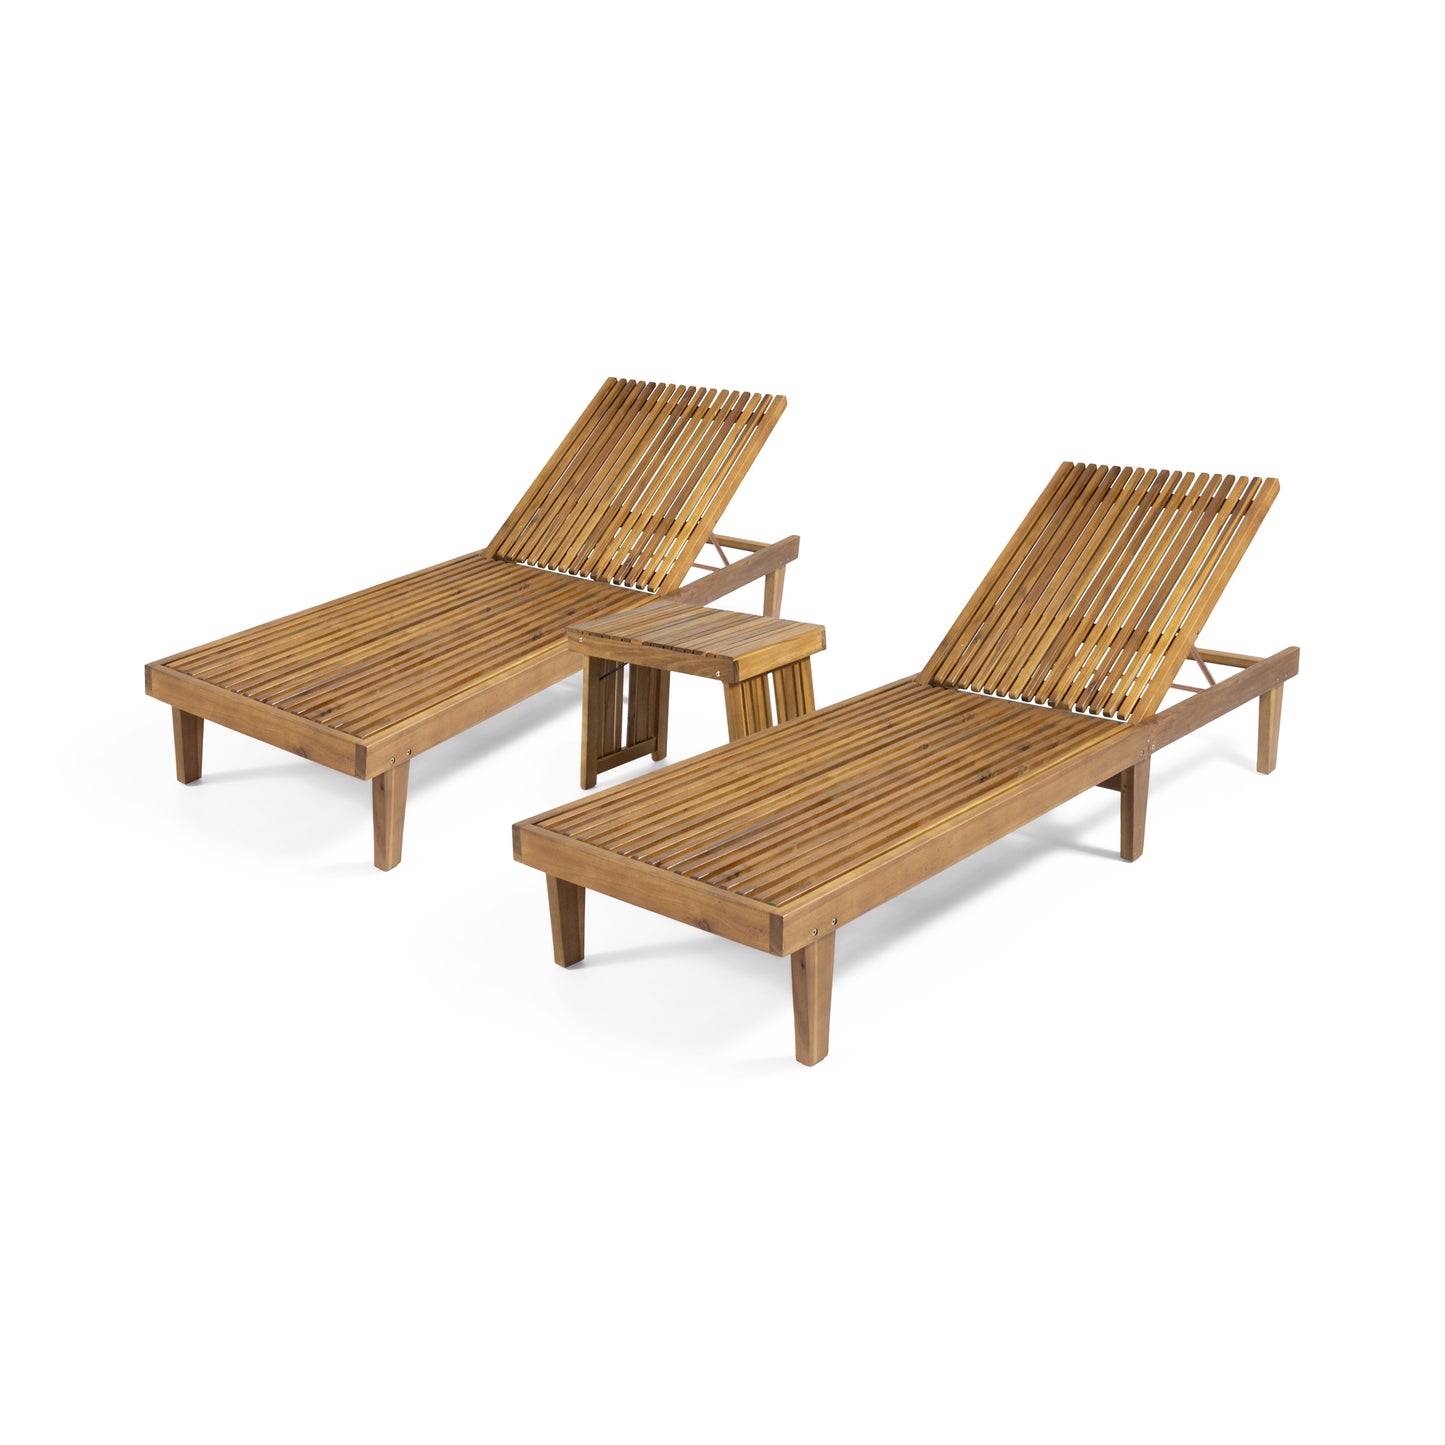 Addisyn Outdoor Acacia Wood 3 Piece Chaise Lounge Set